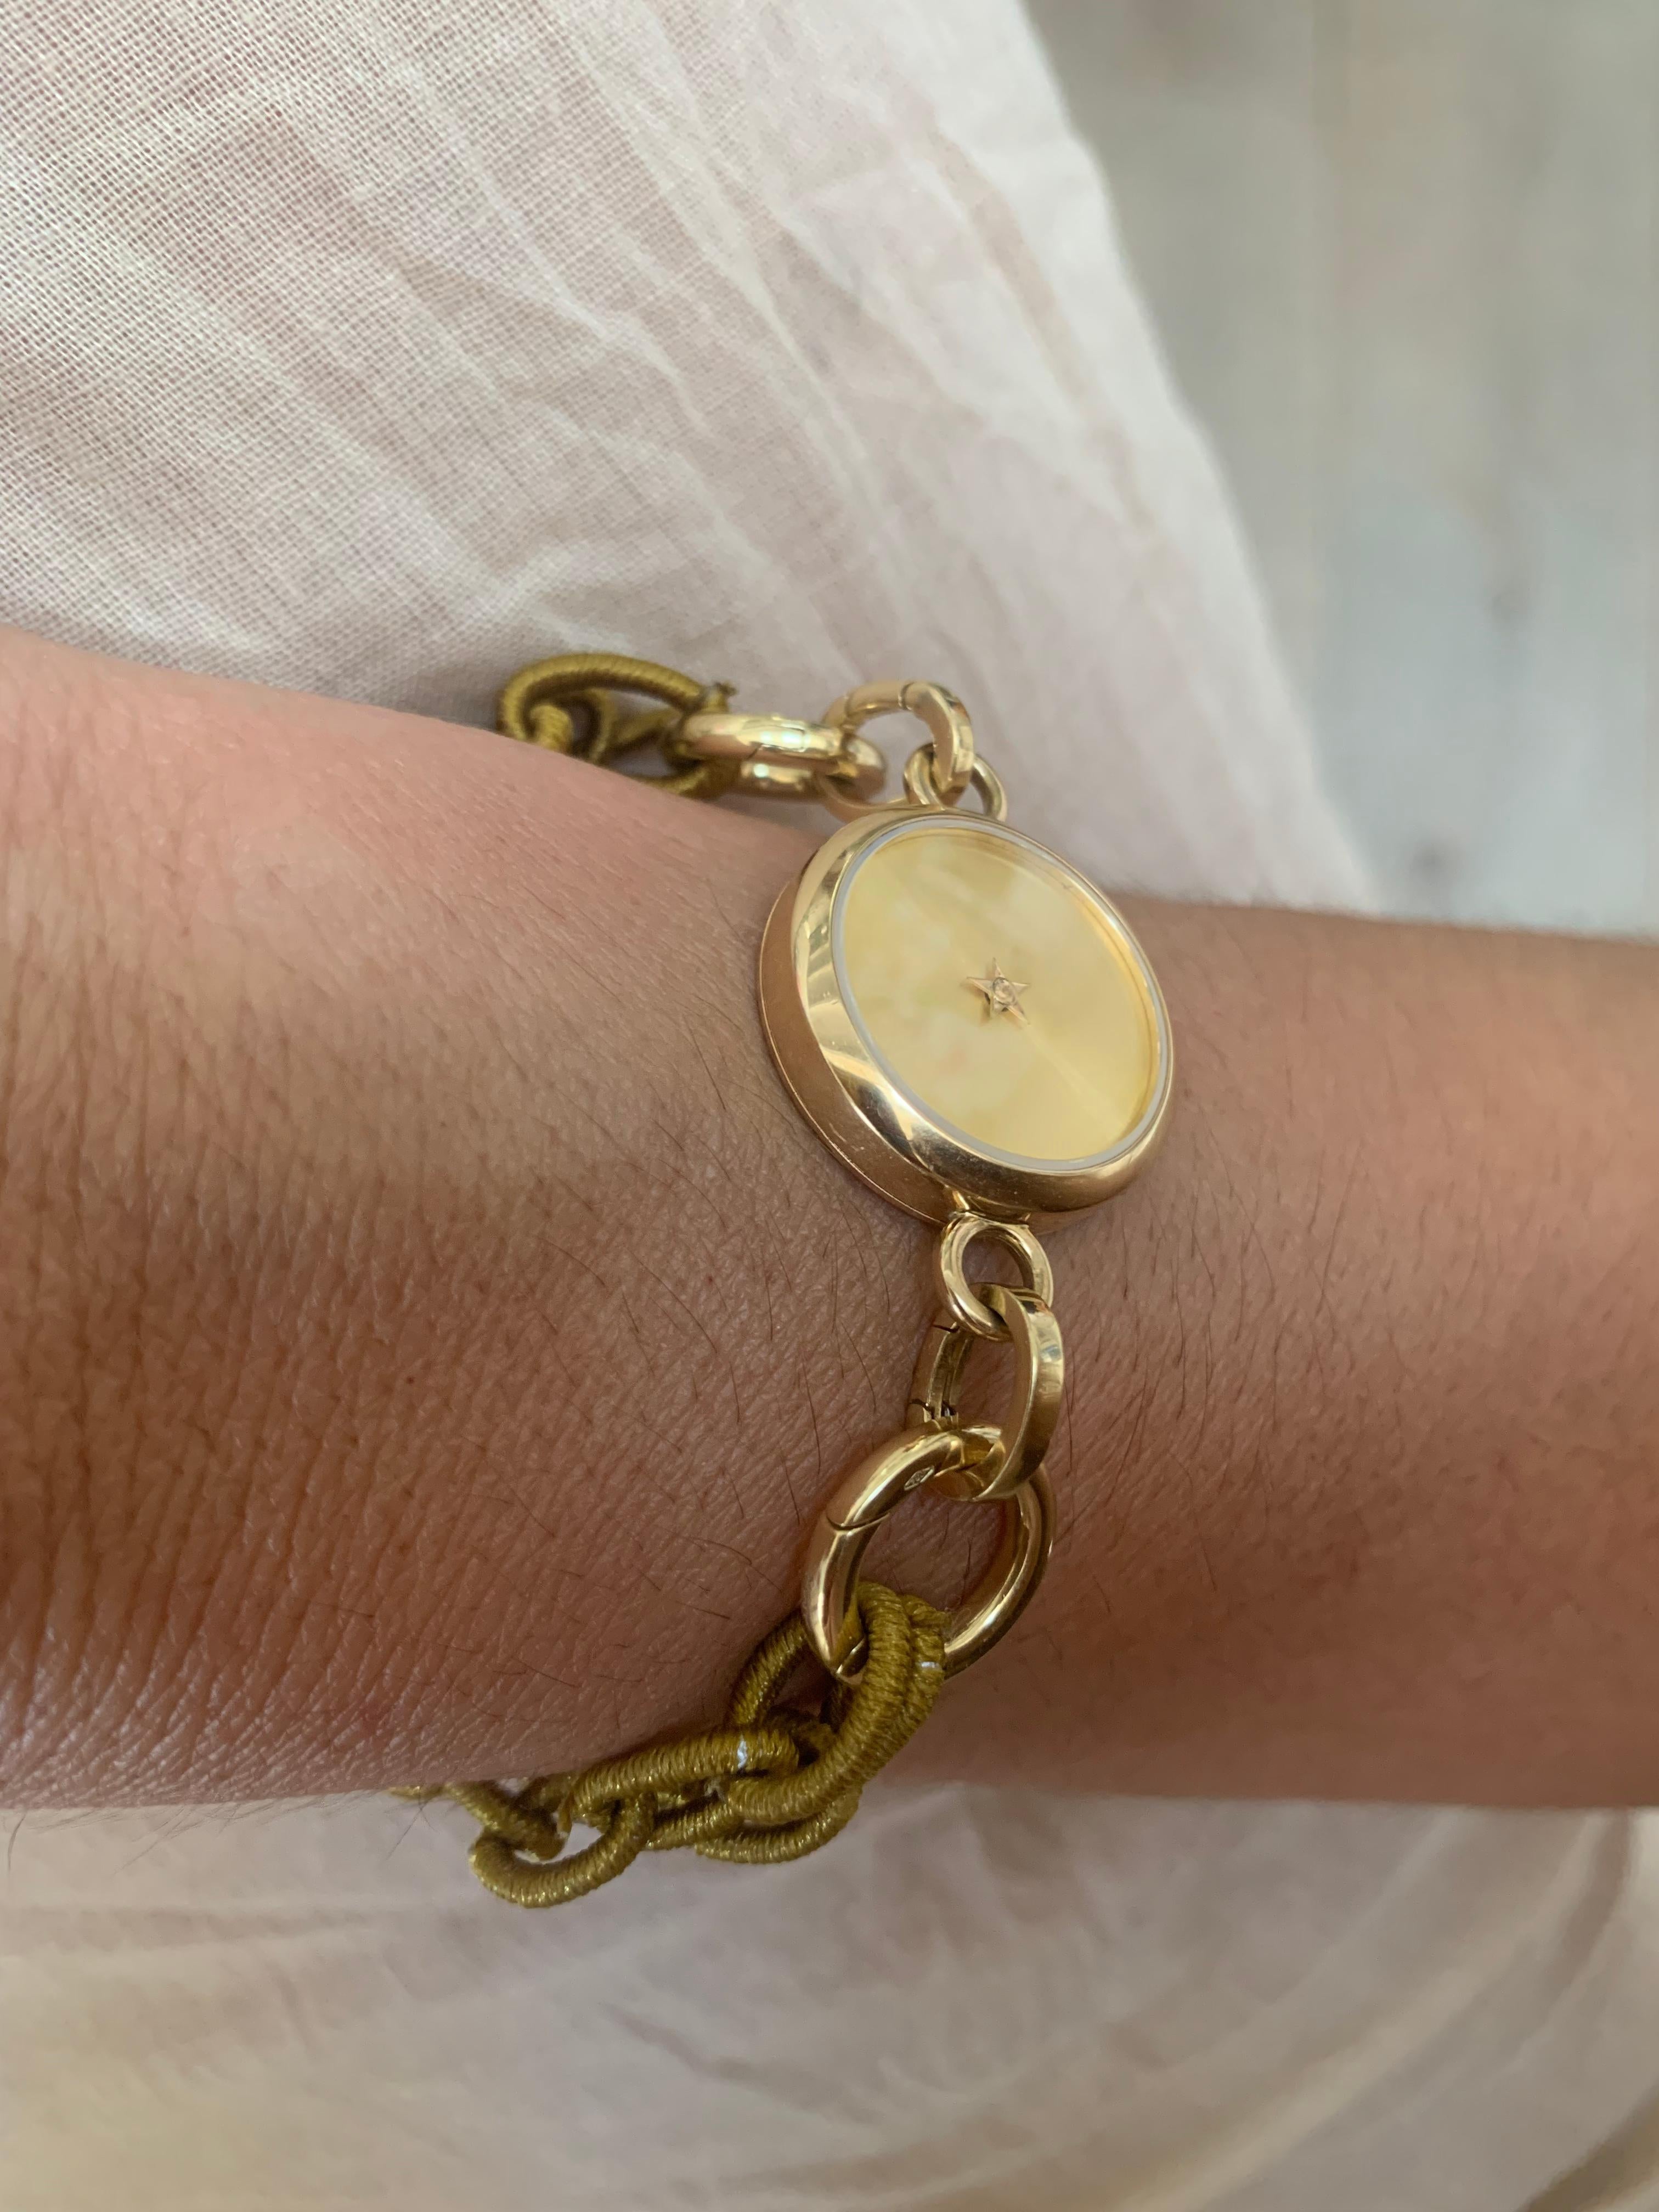 Carpe Diem Pendant is non-time-telling timepiece, essentially golden sunray finishing face.
Beautiful Piece with a movement inside that allows the little star in the middle to move every second to remind that time is precious ! 

The golden star